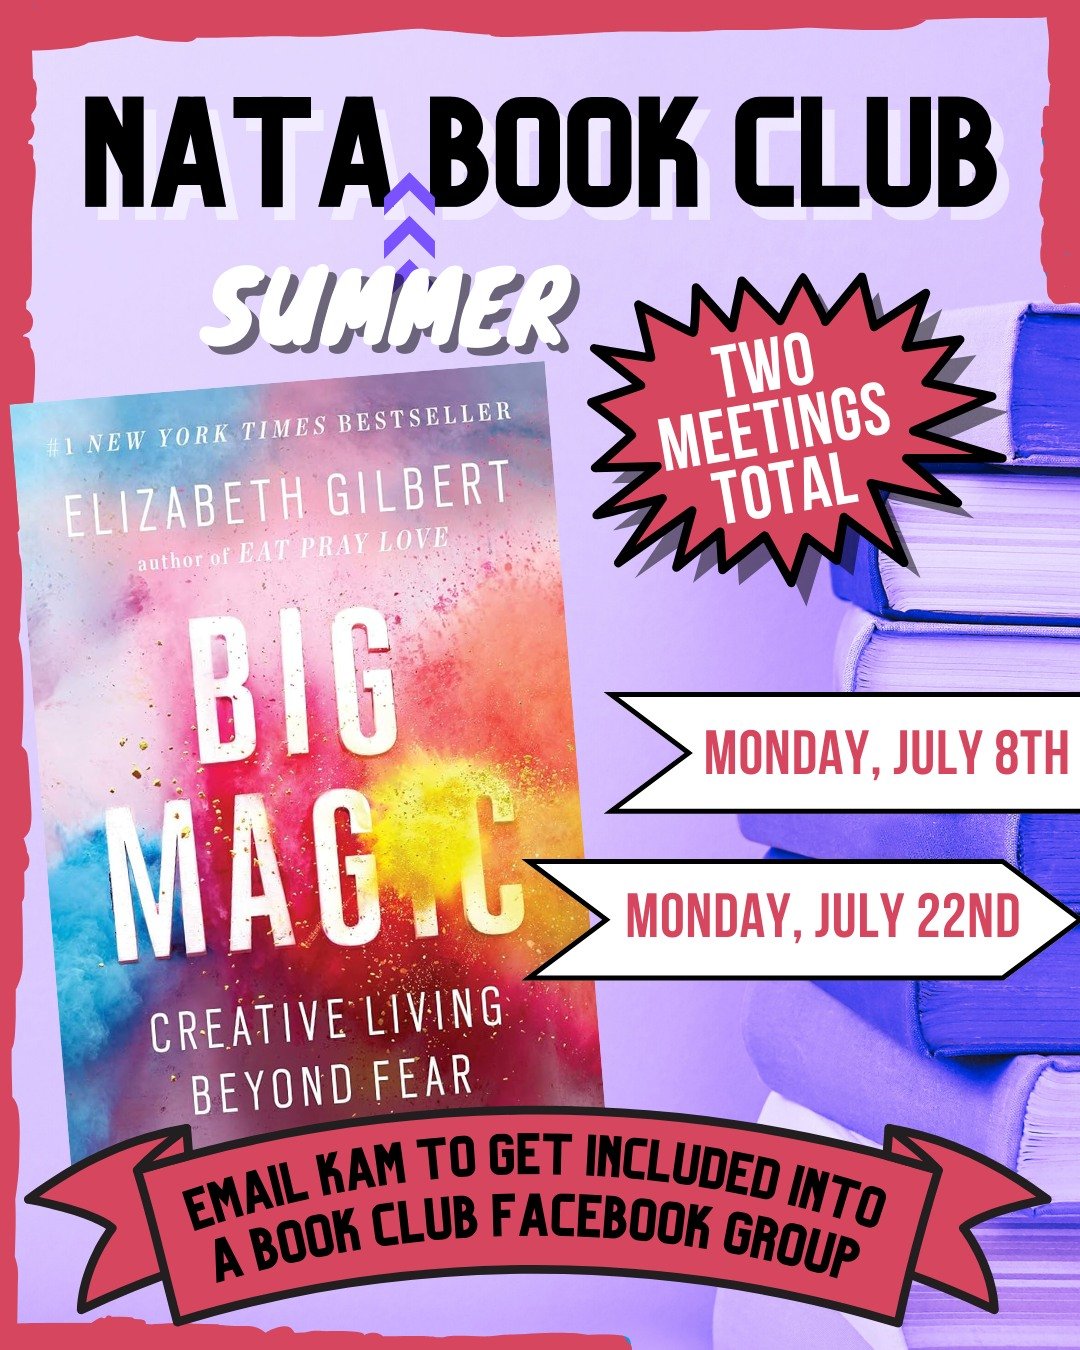 Exciting news! We are bringing back the NATA Book Club this summer!
&bull;
Let&rsquo;s get the date in our calendar! Our first night will be Monday, July 8th at 7pm via Zoom.
&bull;
First things first! Locate a copy of &ldquo;Big Magic: Creative Livi